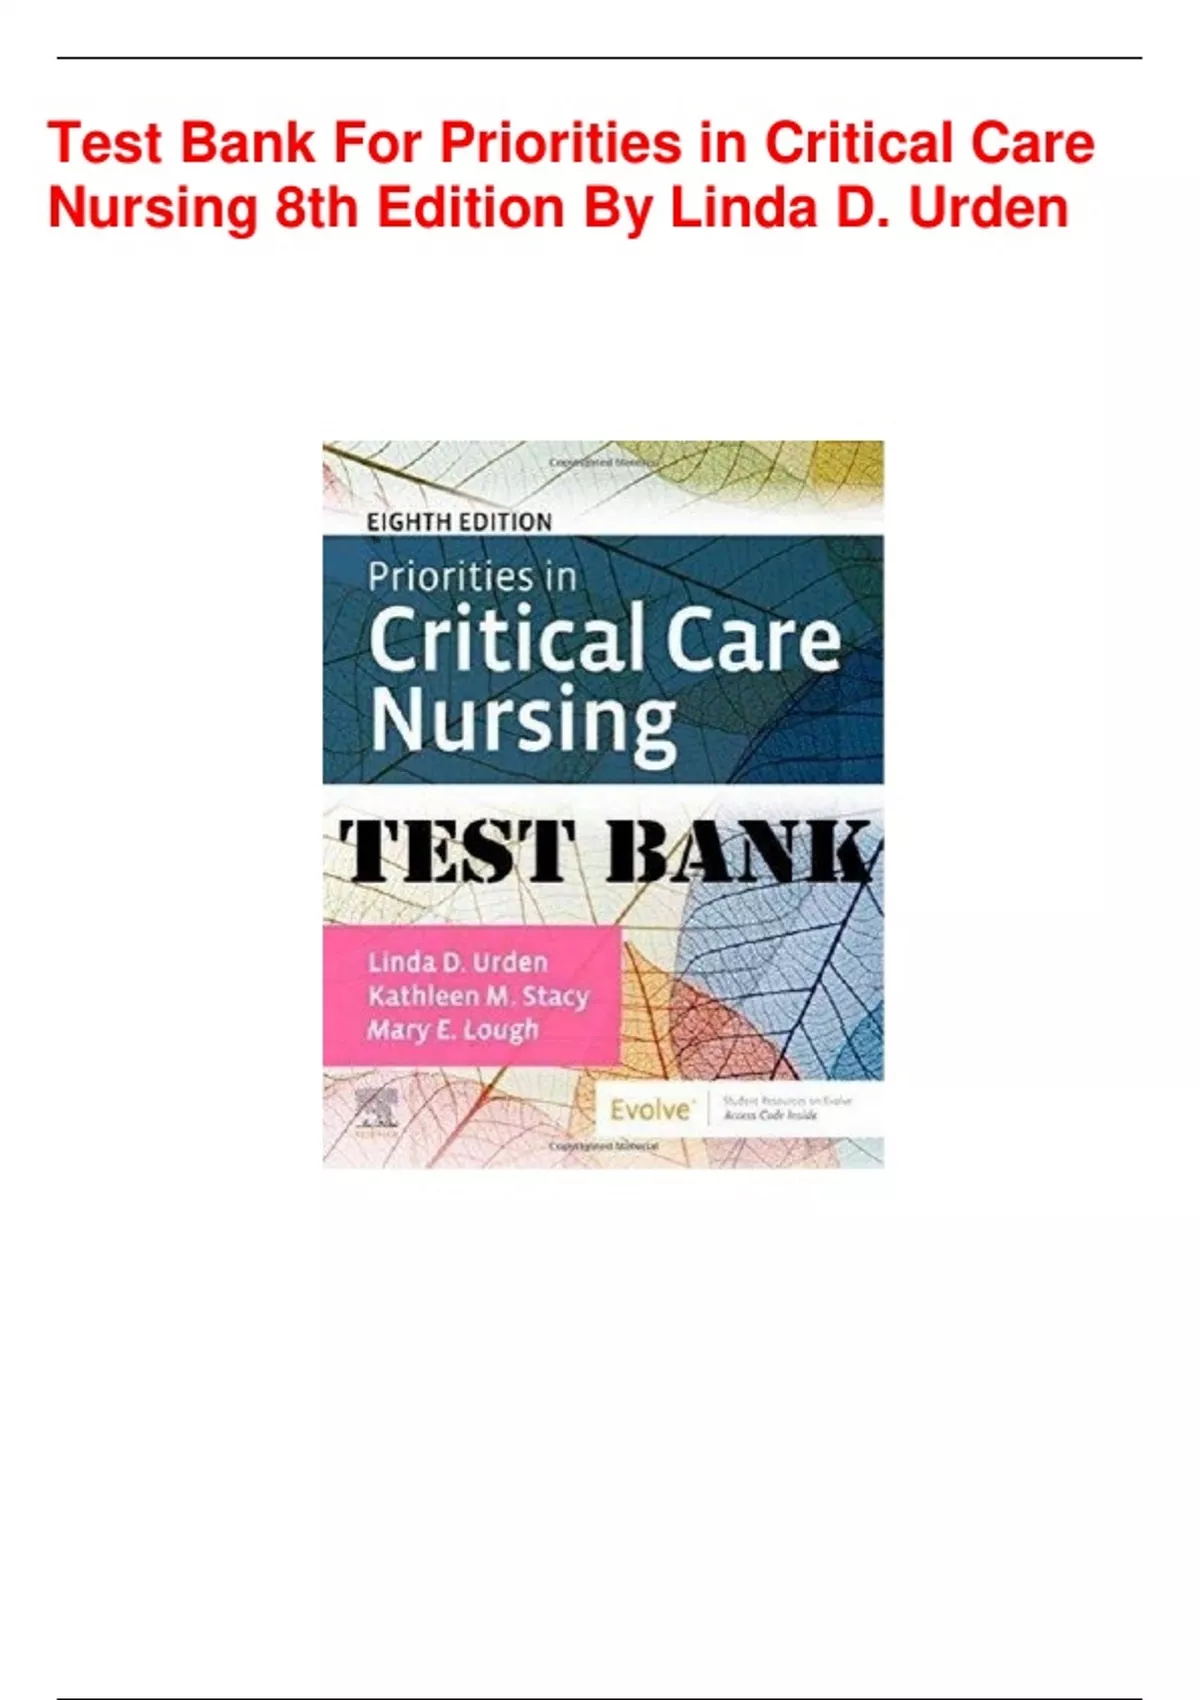 Test Bank For Introduction To Critical Care Nursing 8th Edition Mary Lou  Sole Deborah Klein Marthe Moseley, PDF, Nursing